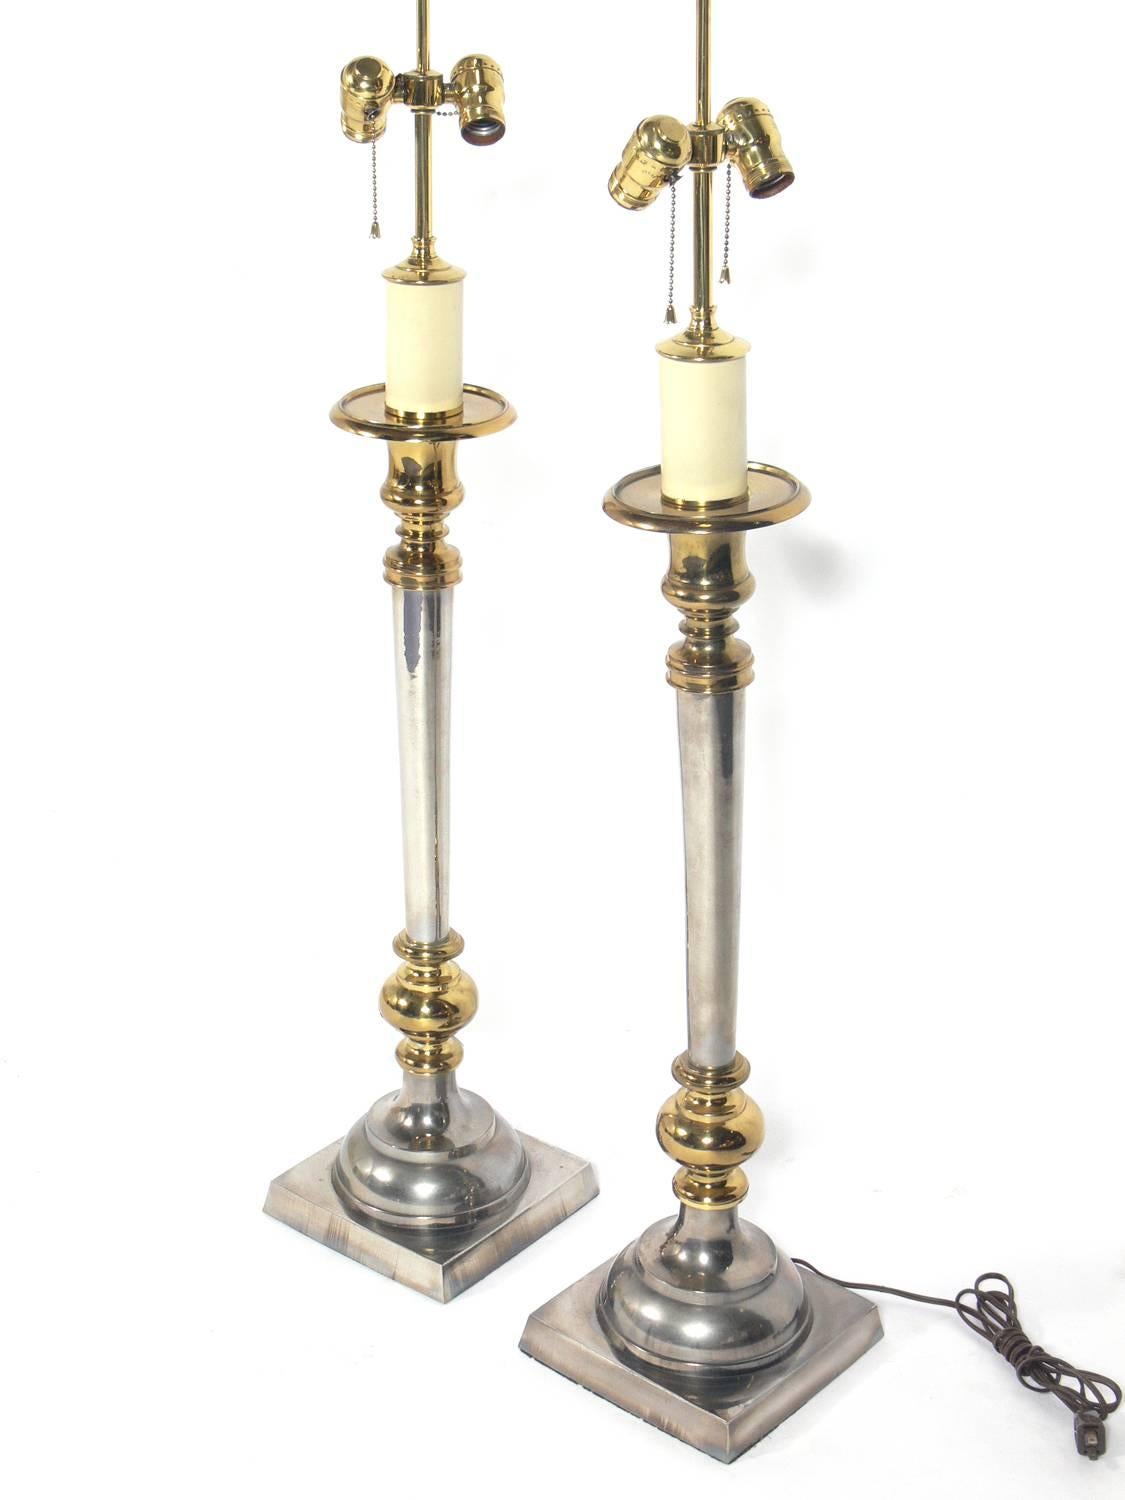 Pair of Large Scale Nickel and Brass Lamps, circa 1960s. Rewired and ready to use. 